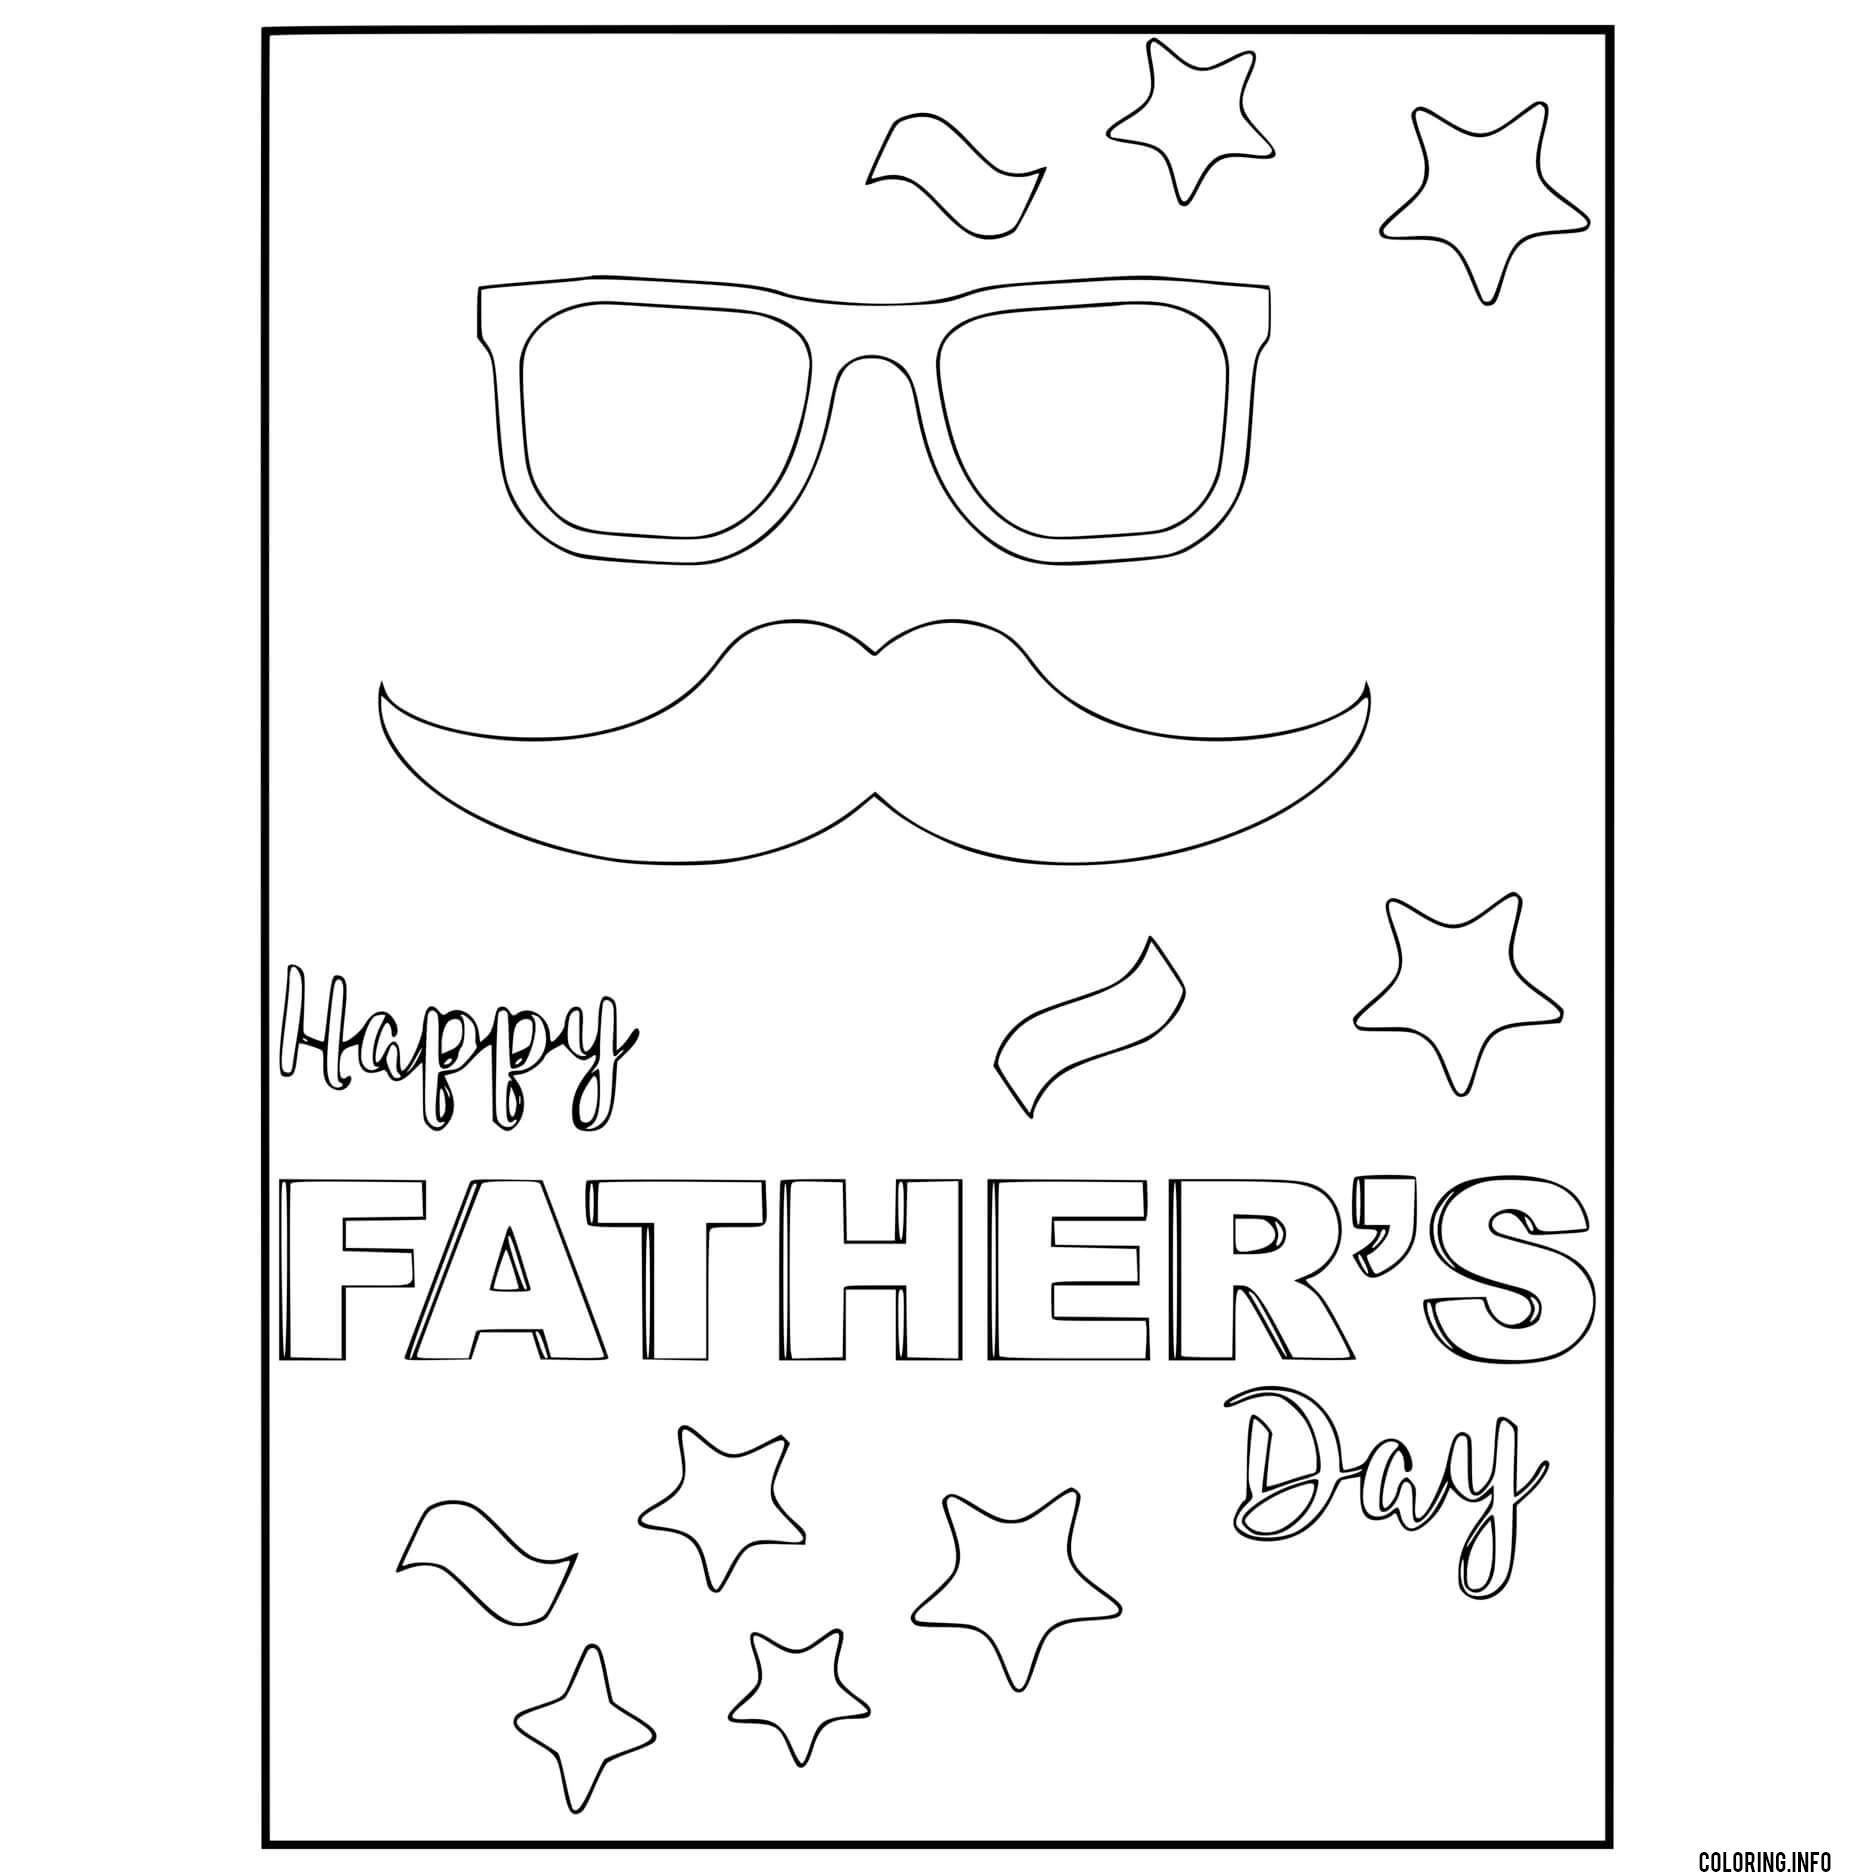 Happy Fathers Day coloring